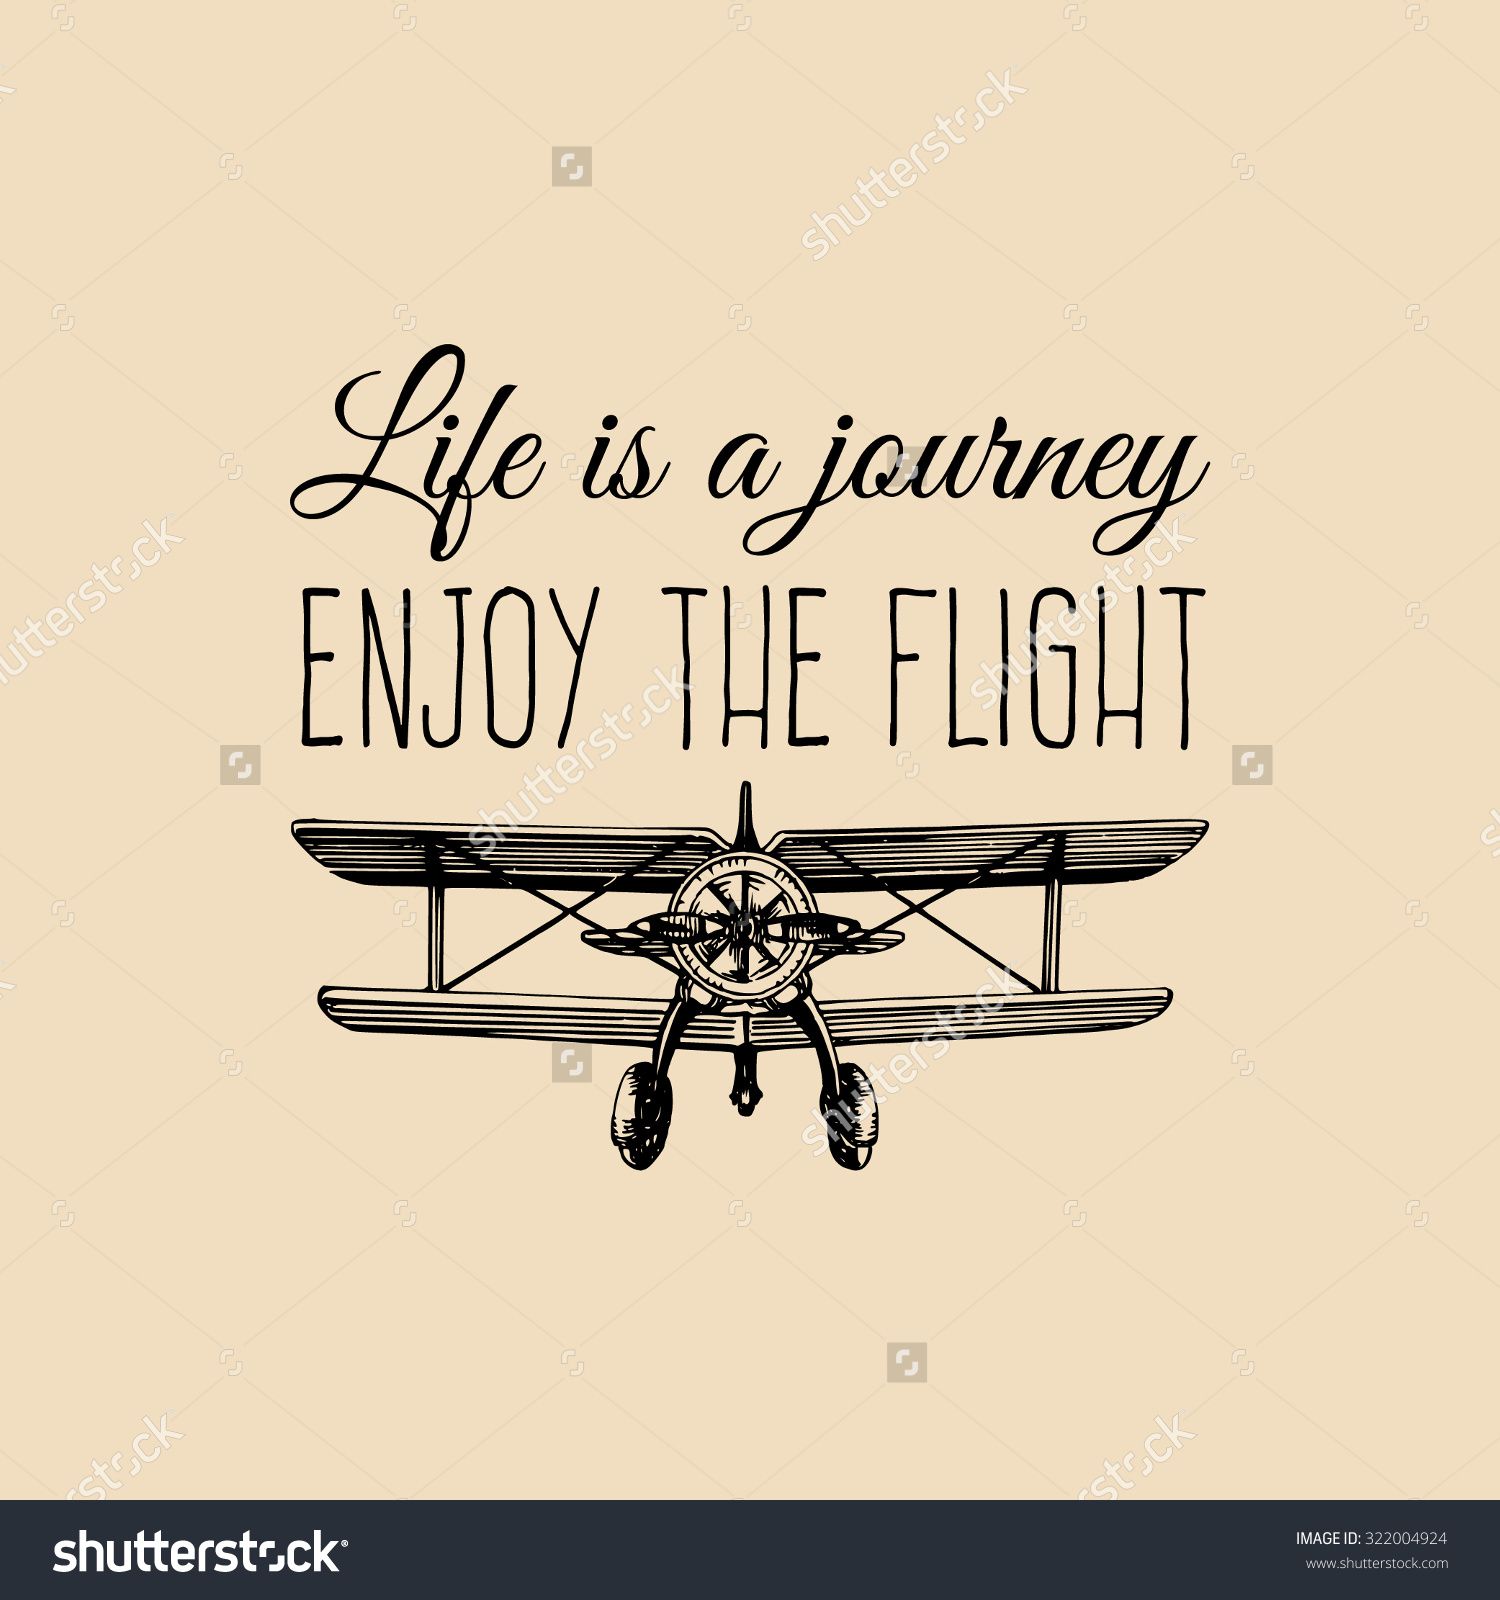 Life is a journey, enjoy the flight motivational quote. Vintage ...